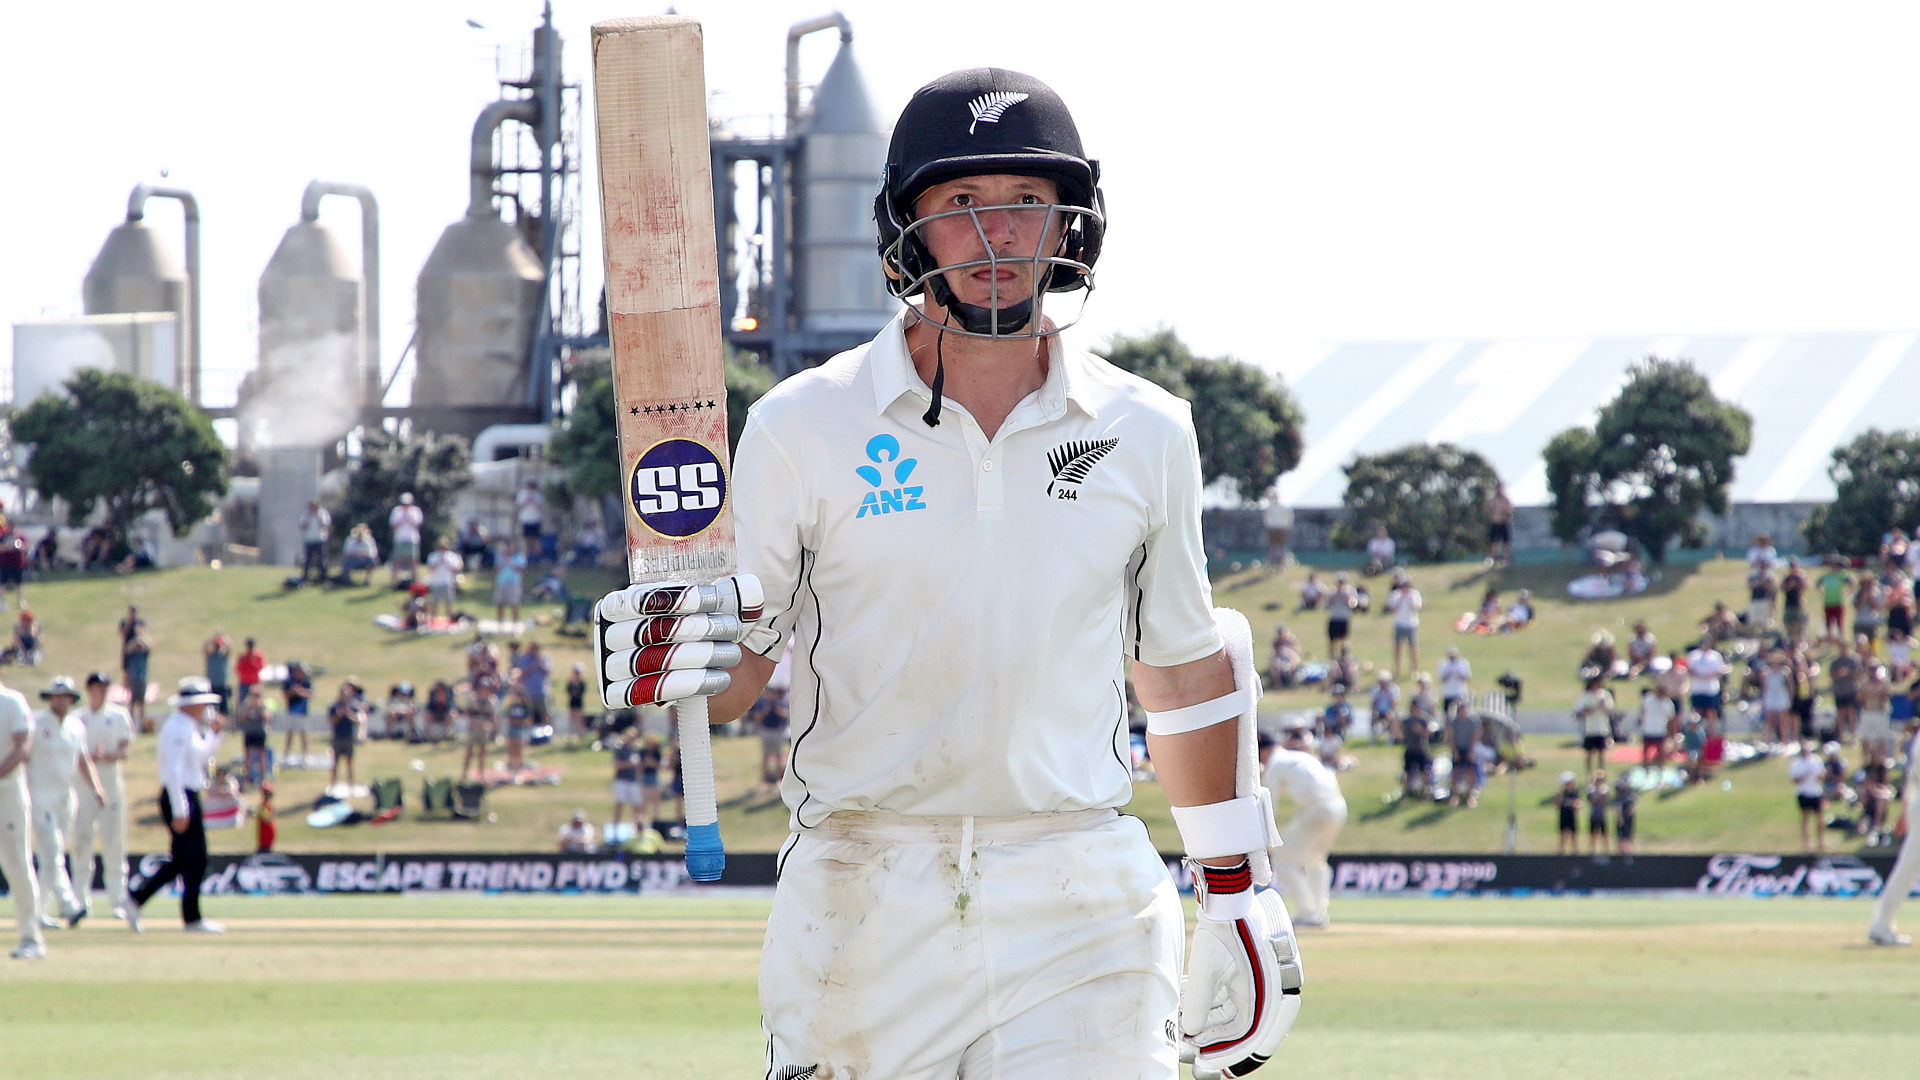 BJ Watling could end his career on a high note by helping New Zealand win the ICC World Test Championship final next month.